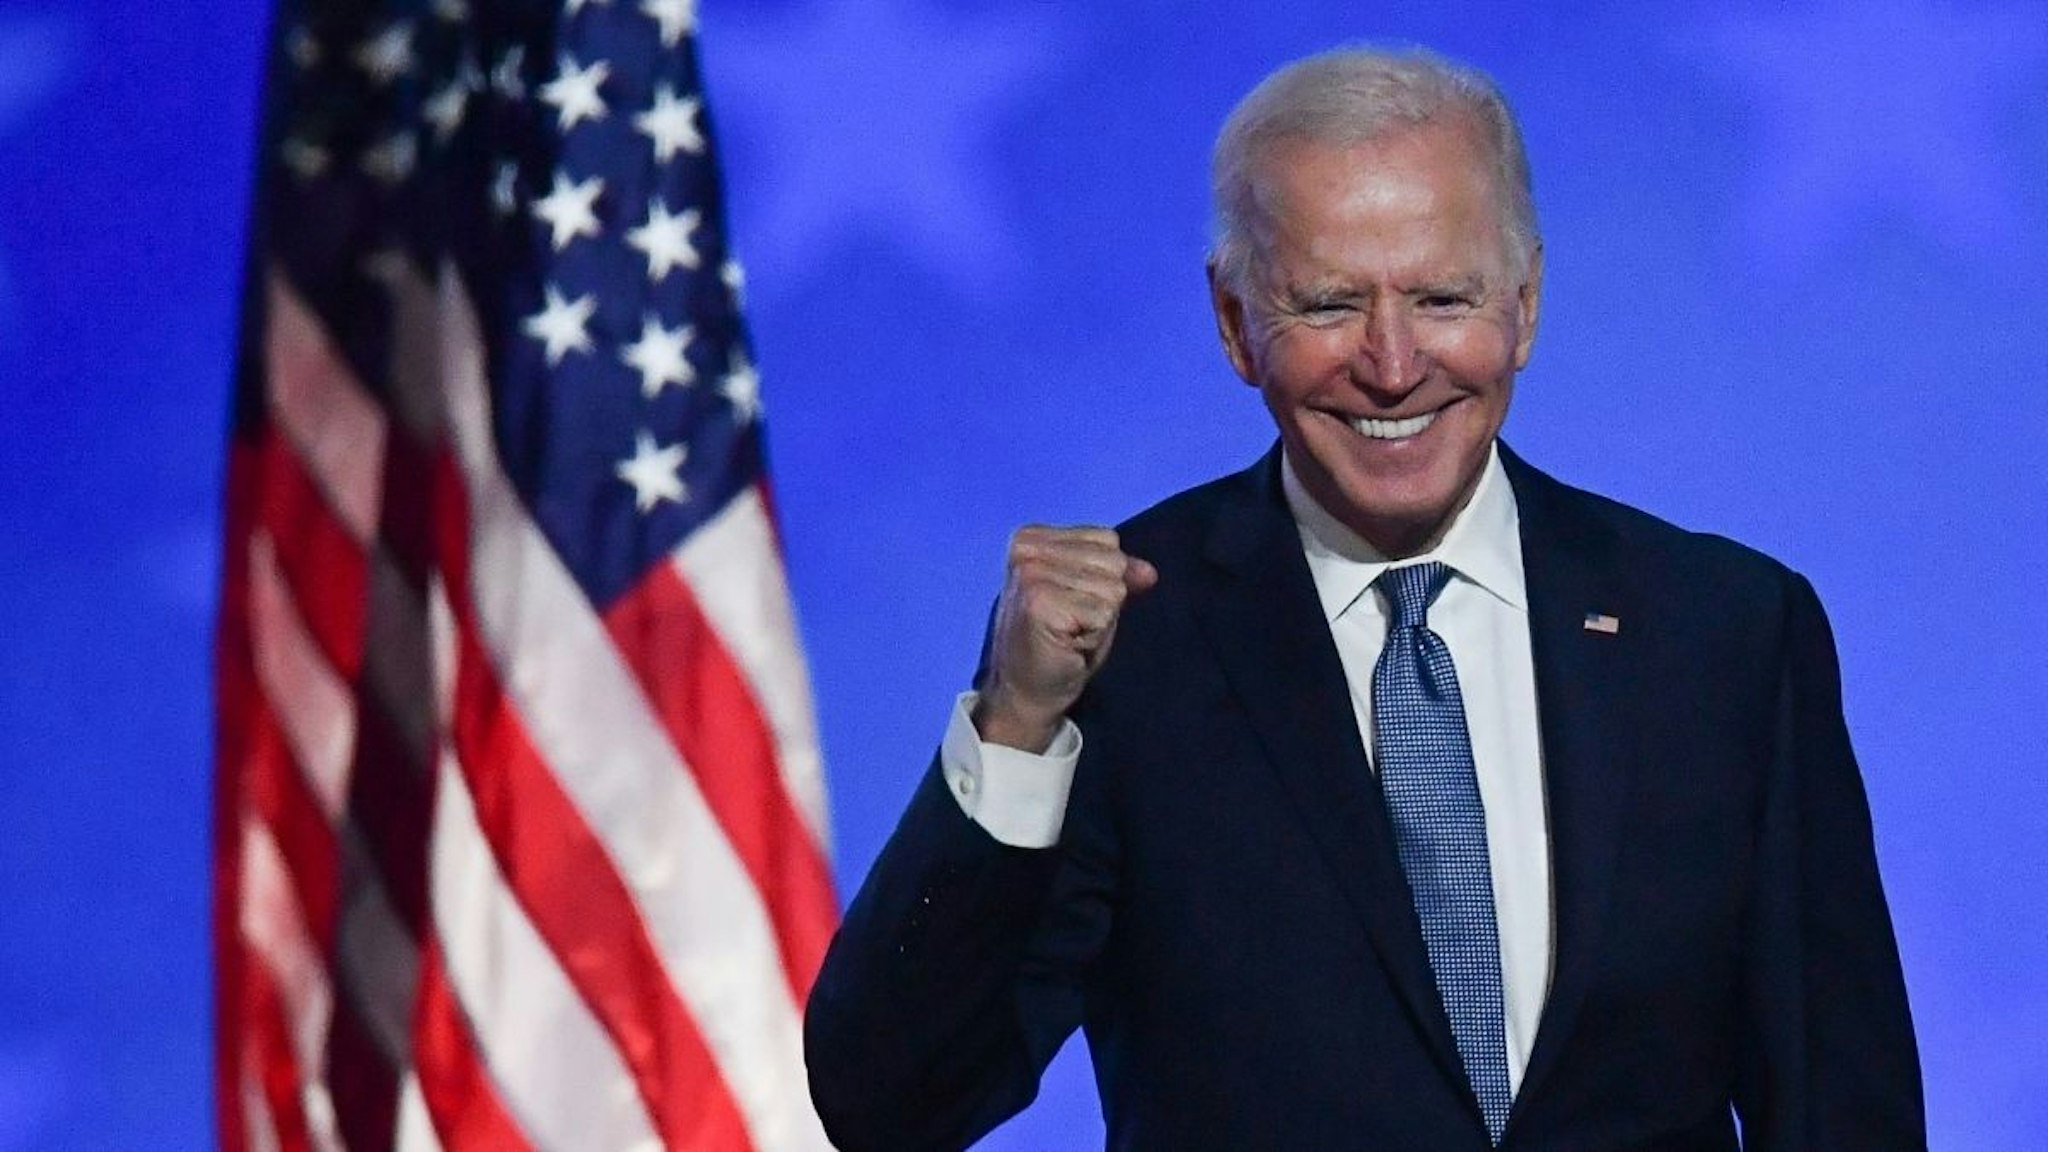 Then-Democratic presidential nominee Joe Biden gestures after speaking during election night at the Chase Center in Wilmington, Delaware, early on November 4, 2020.